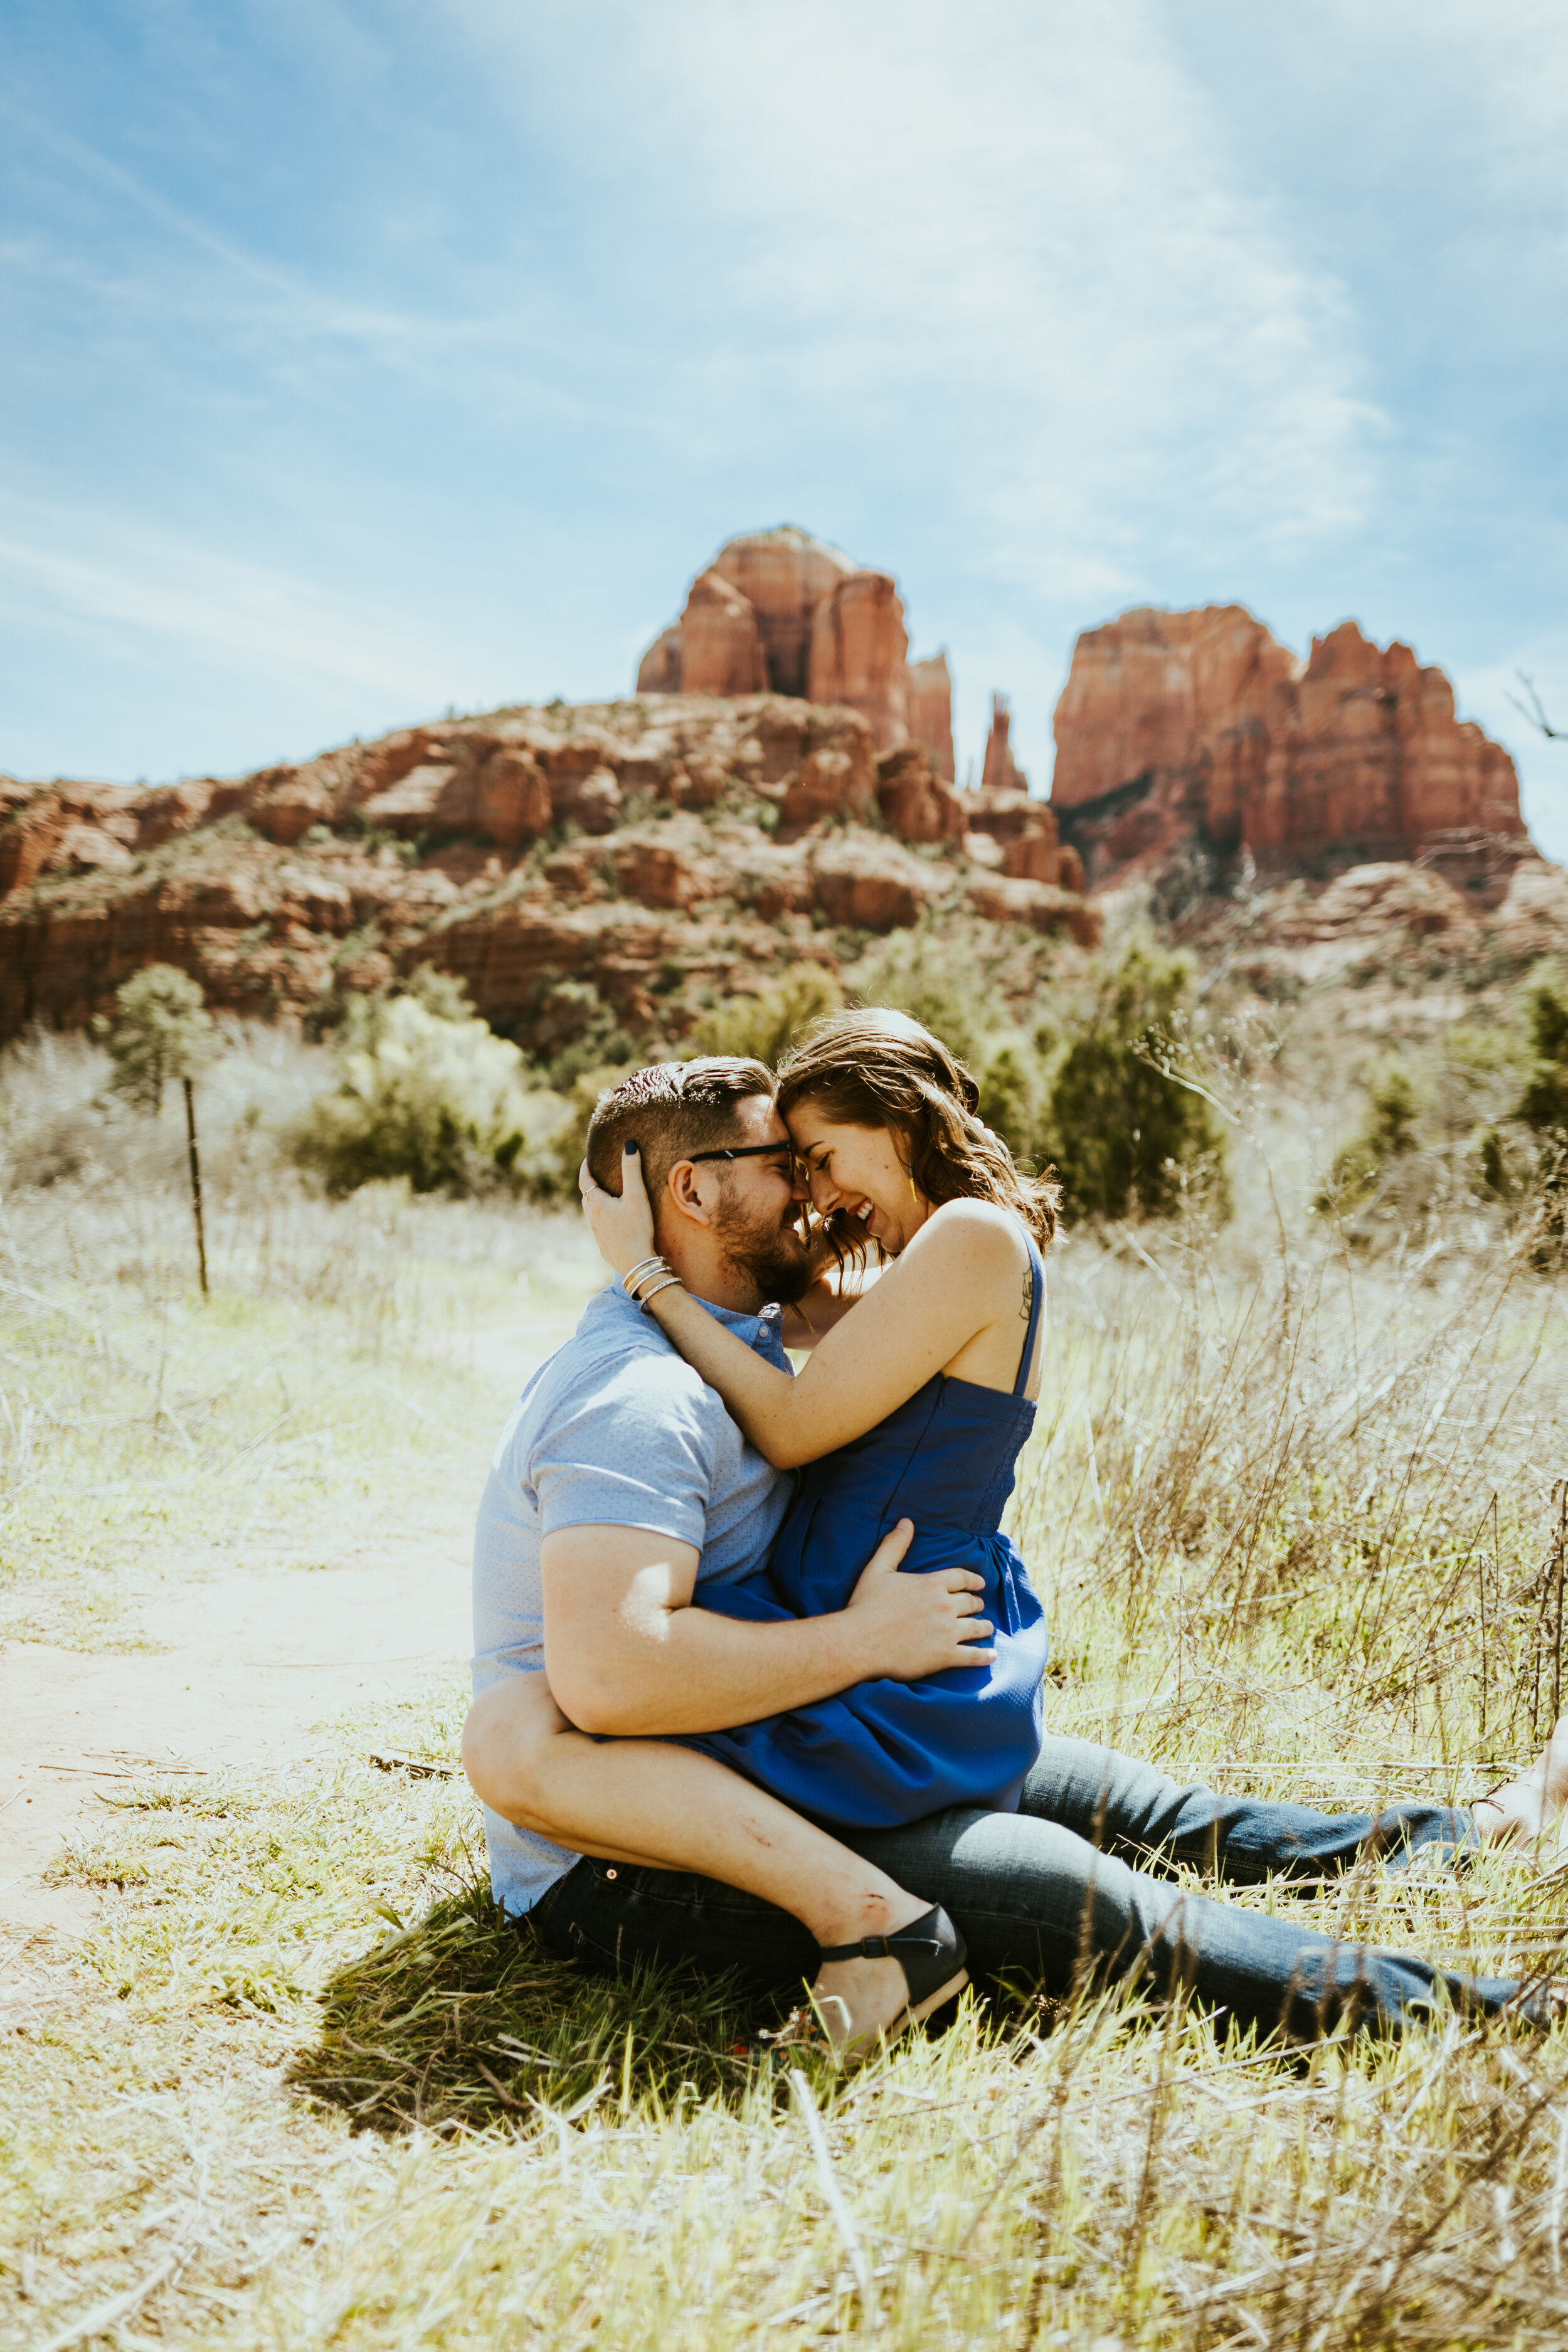 red rock crossing sedona arizona cathedral rock crescent moon ranch couple photos engagement photo outfit inspiration couple posing ideas midday photos-24.jpg